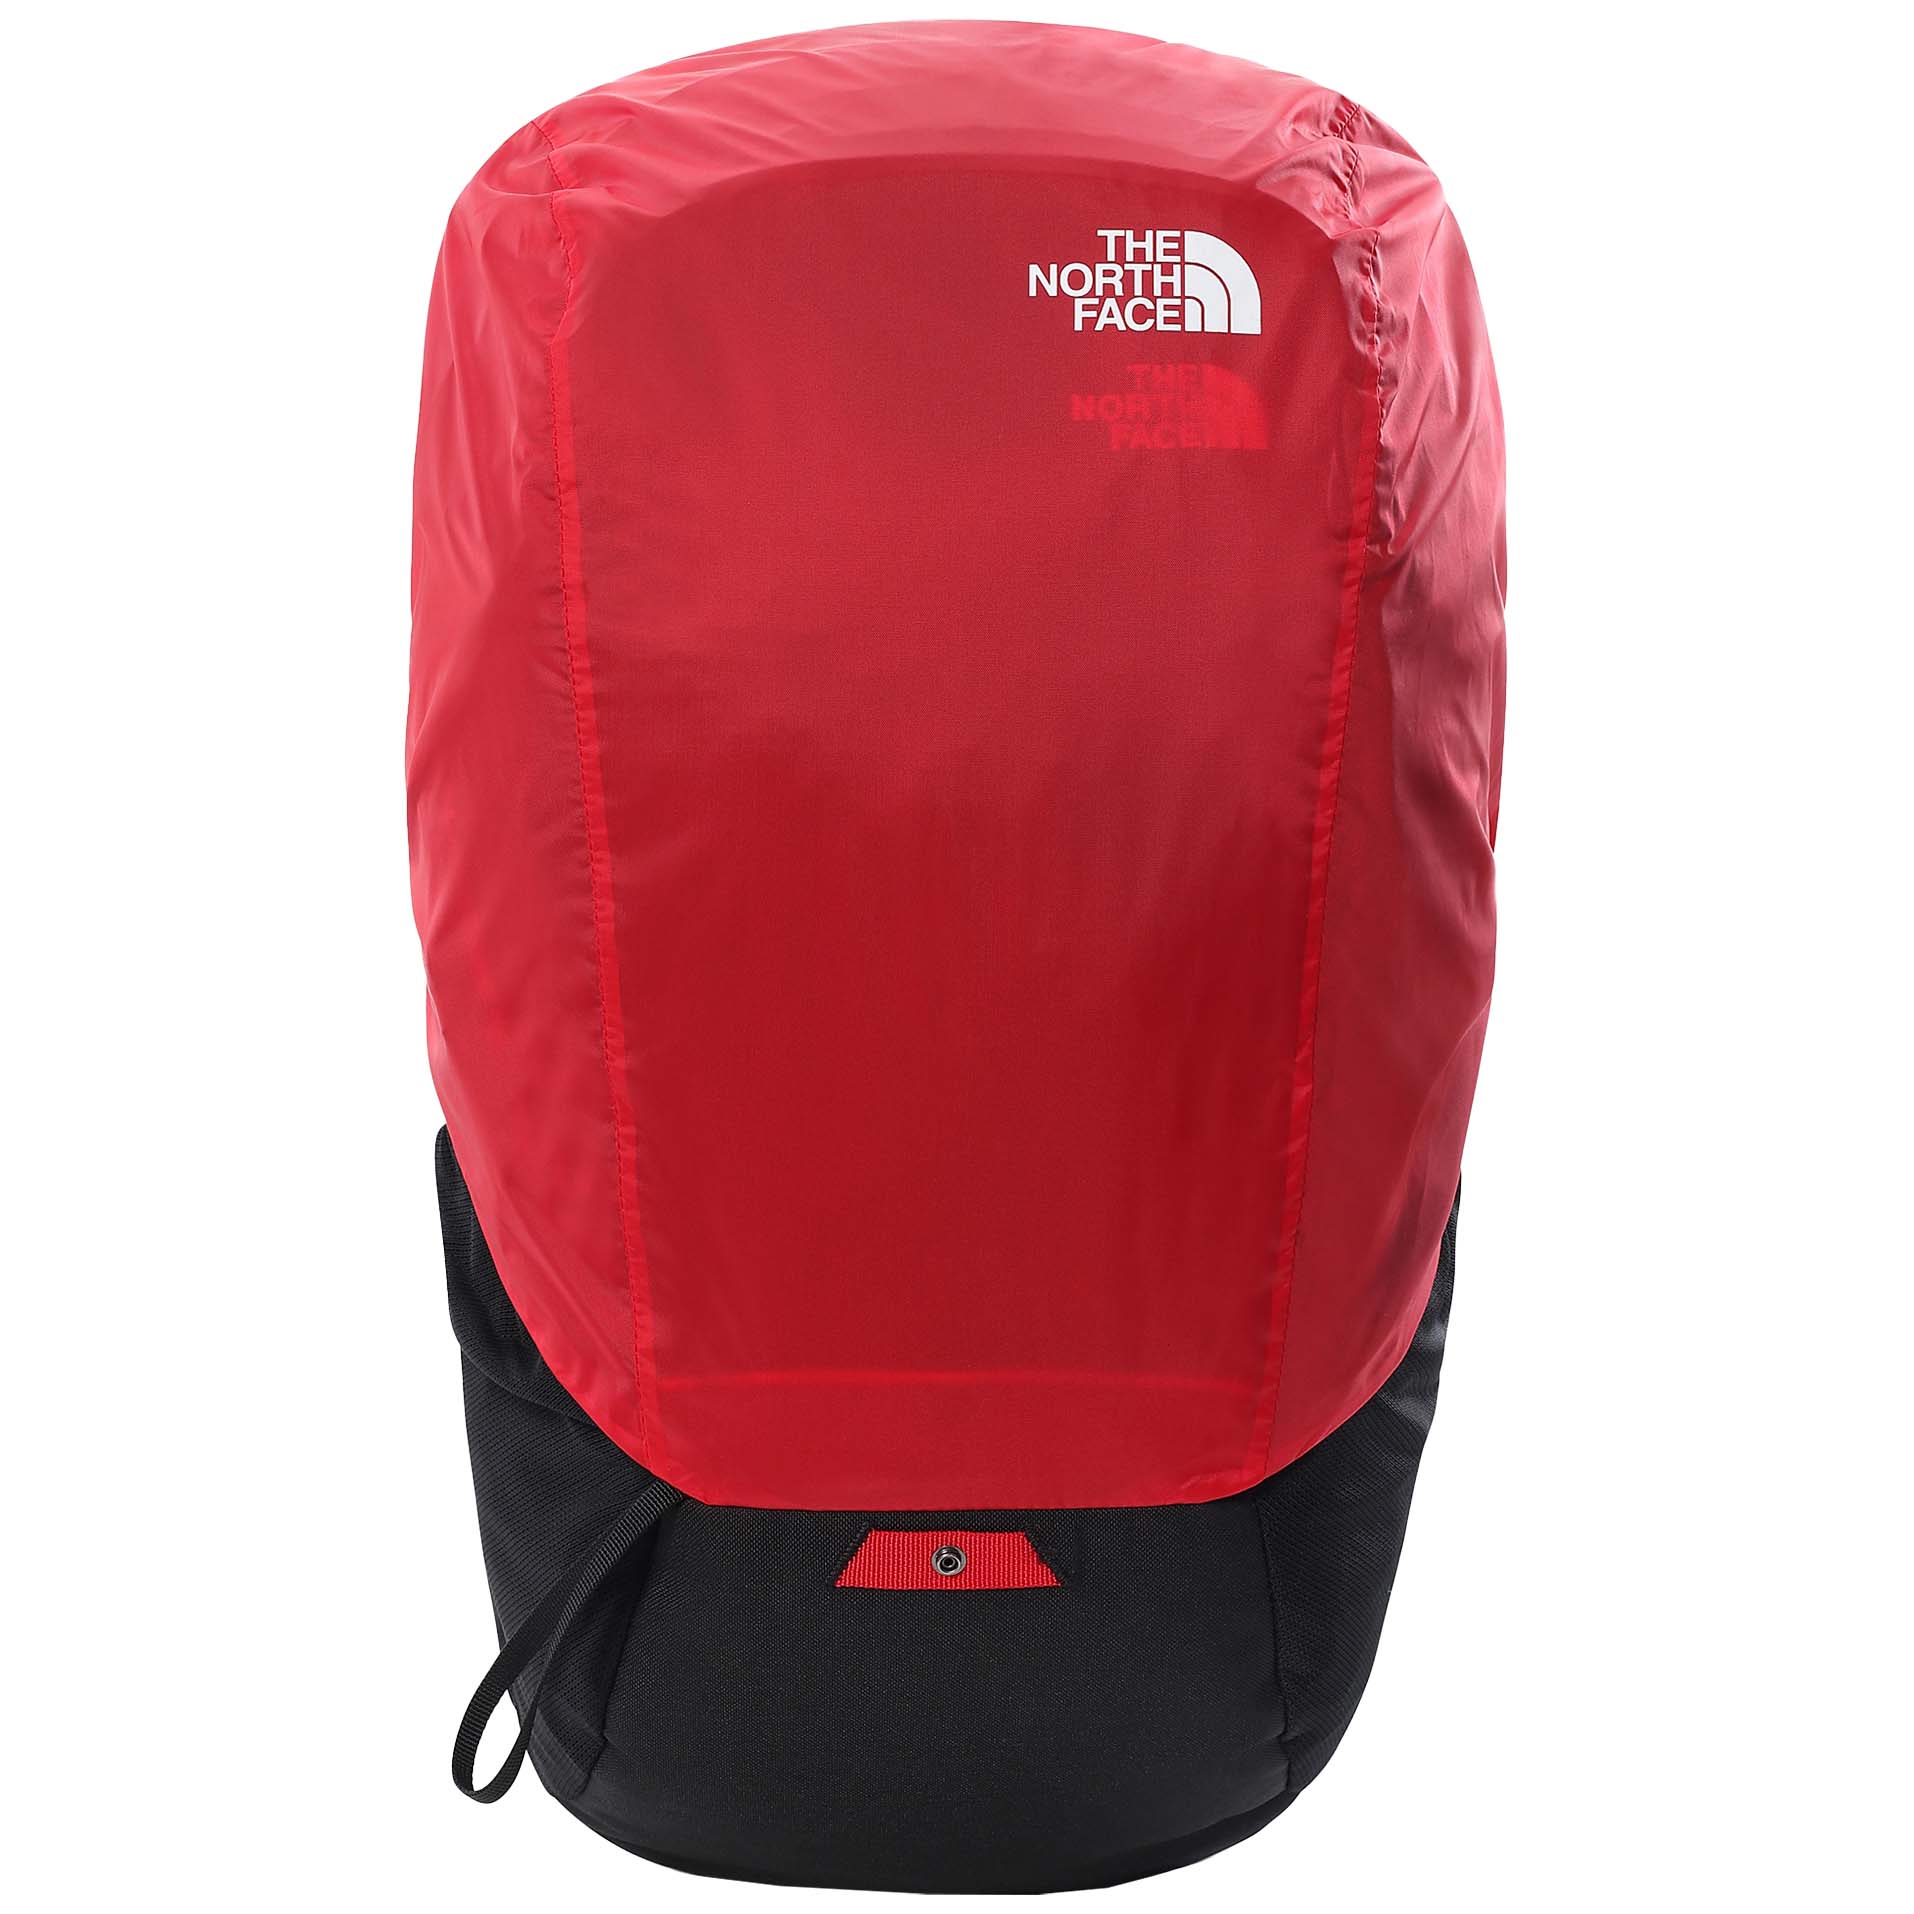 The North Face Basin 18 Hiking Backpack